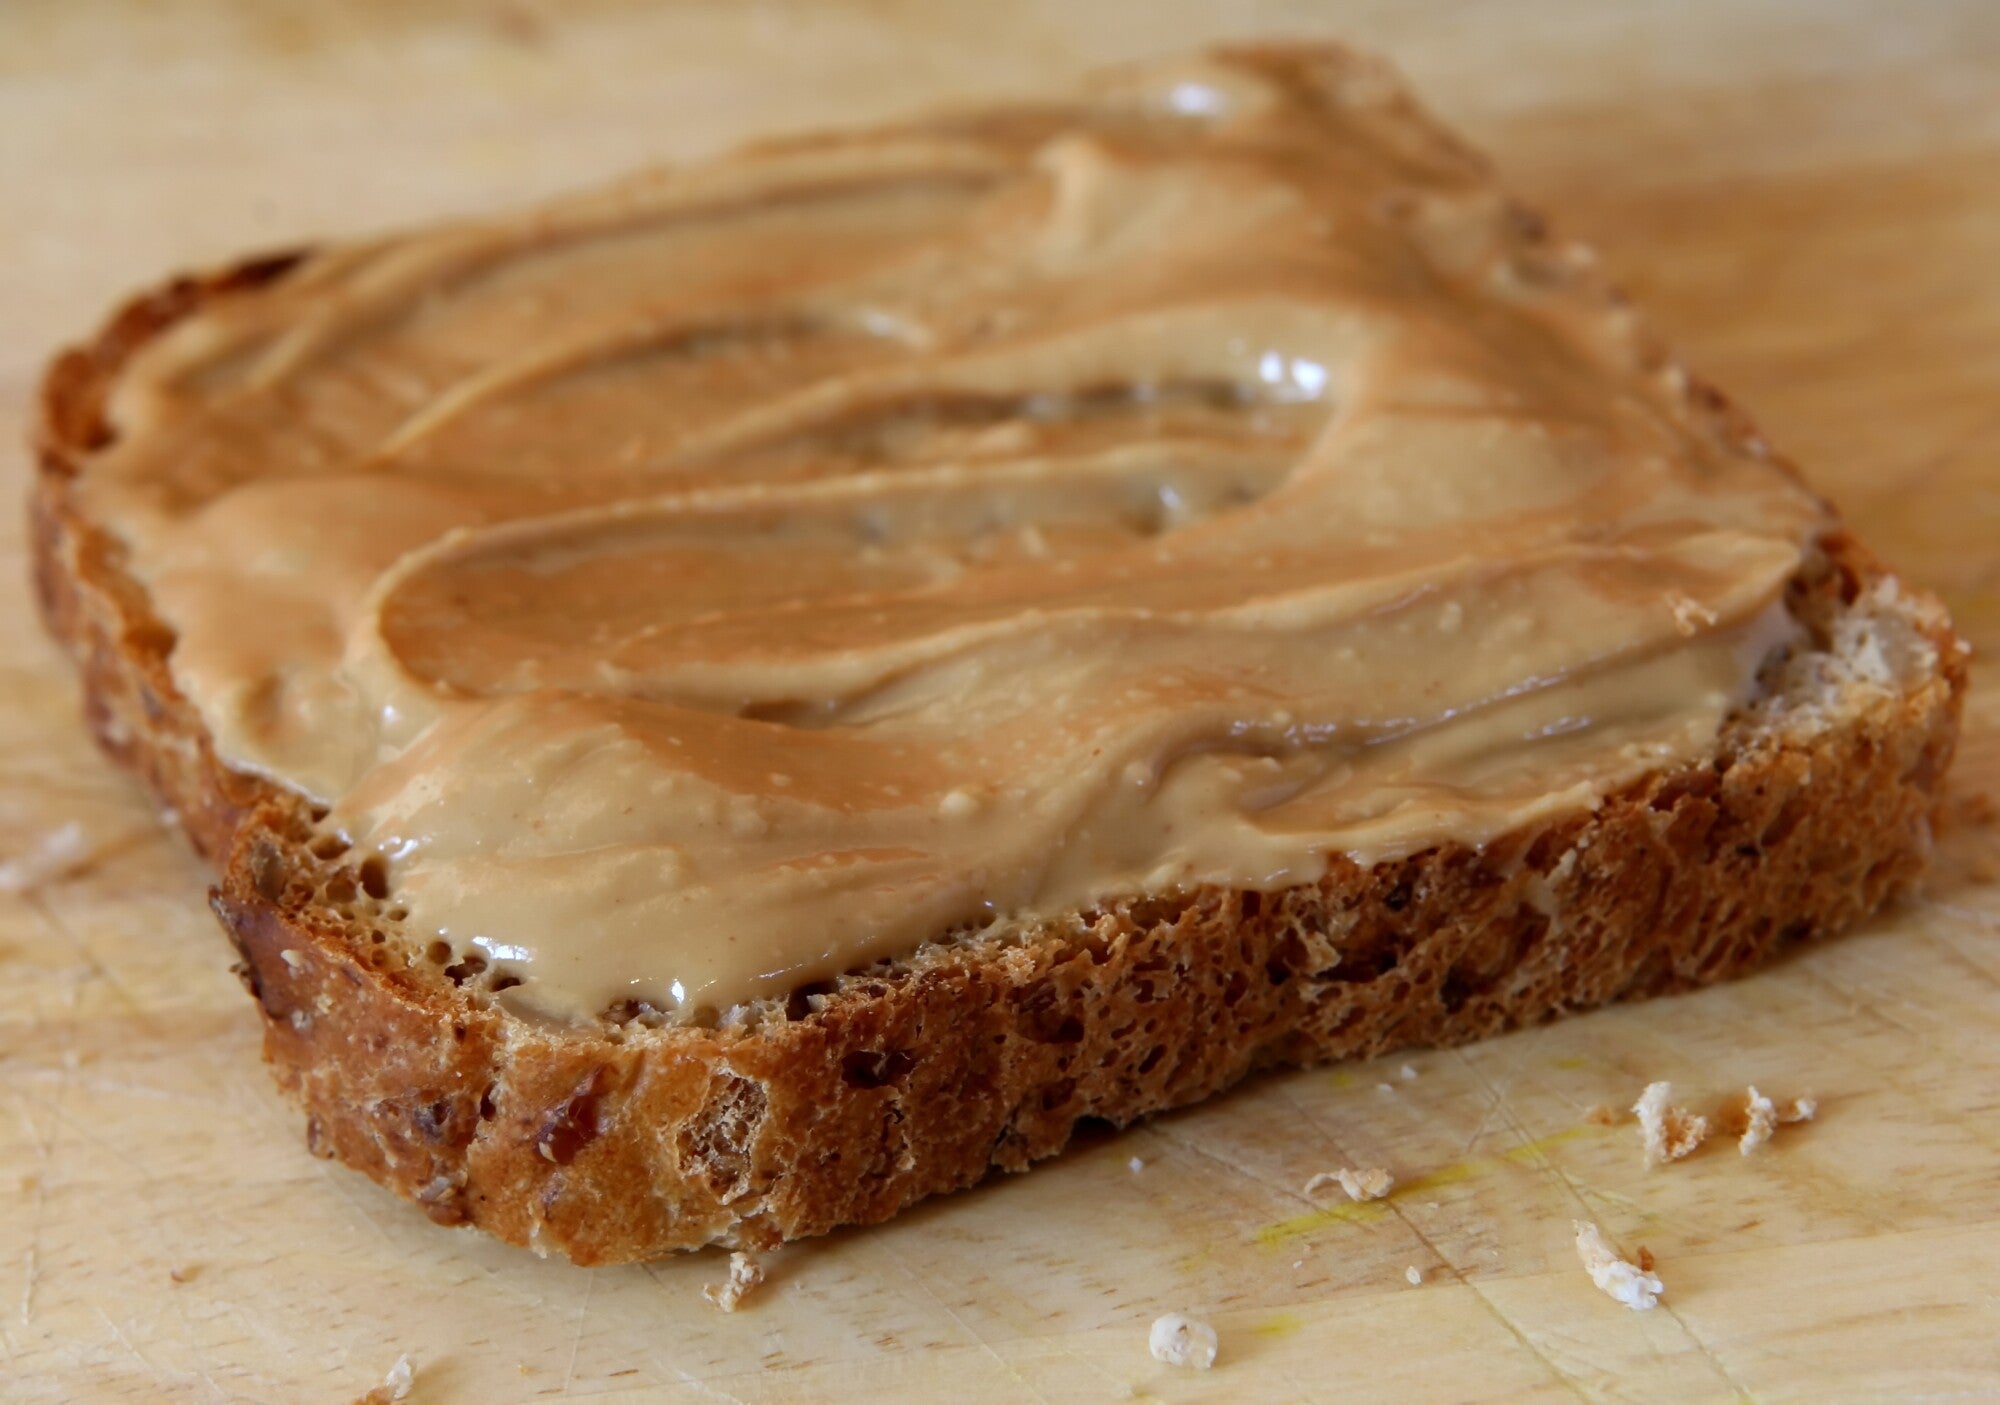 6 Peanut Butter Benefits You Probably Didn't Know